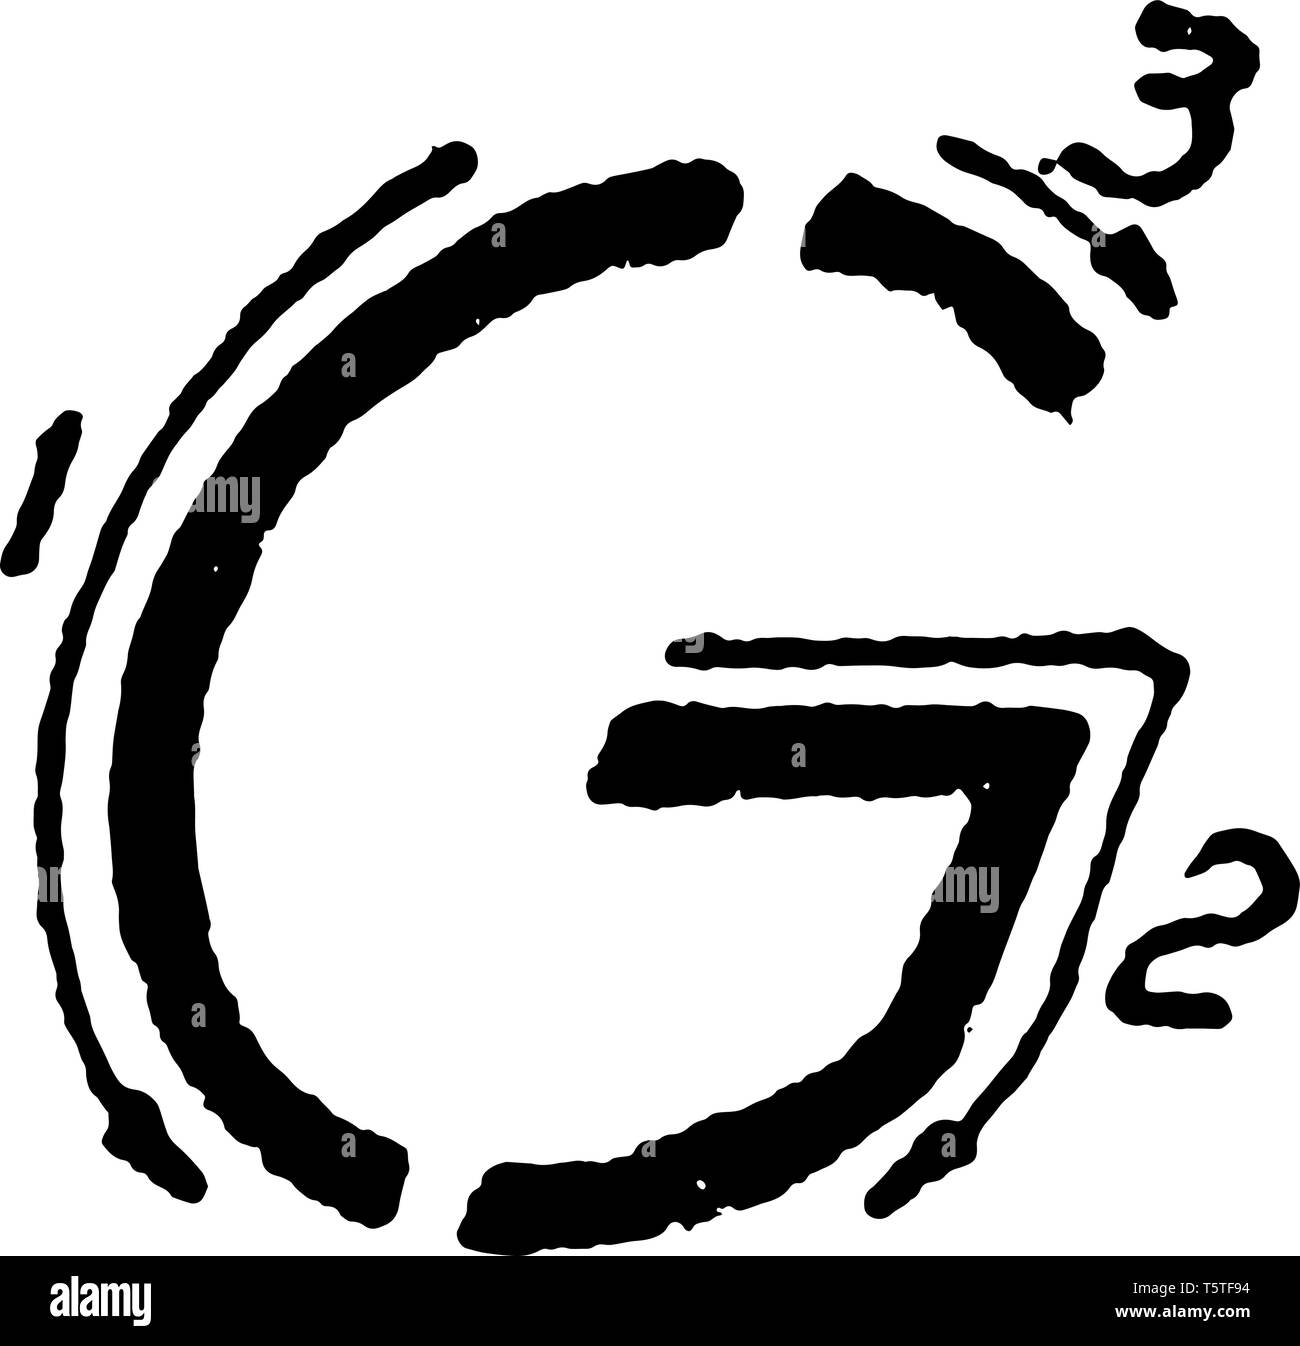 Inclined Capital Letter G where the stroke directions in writing